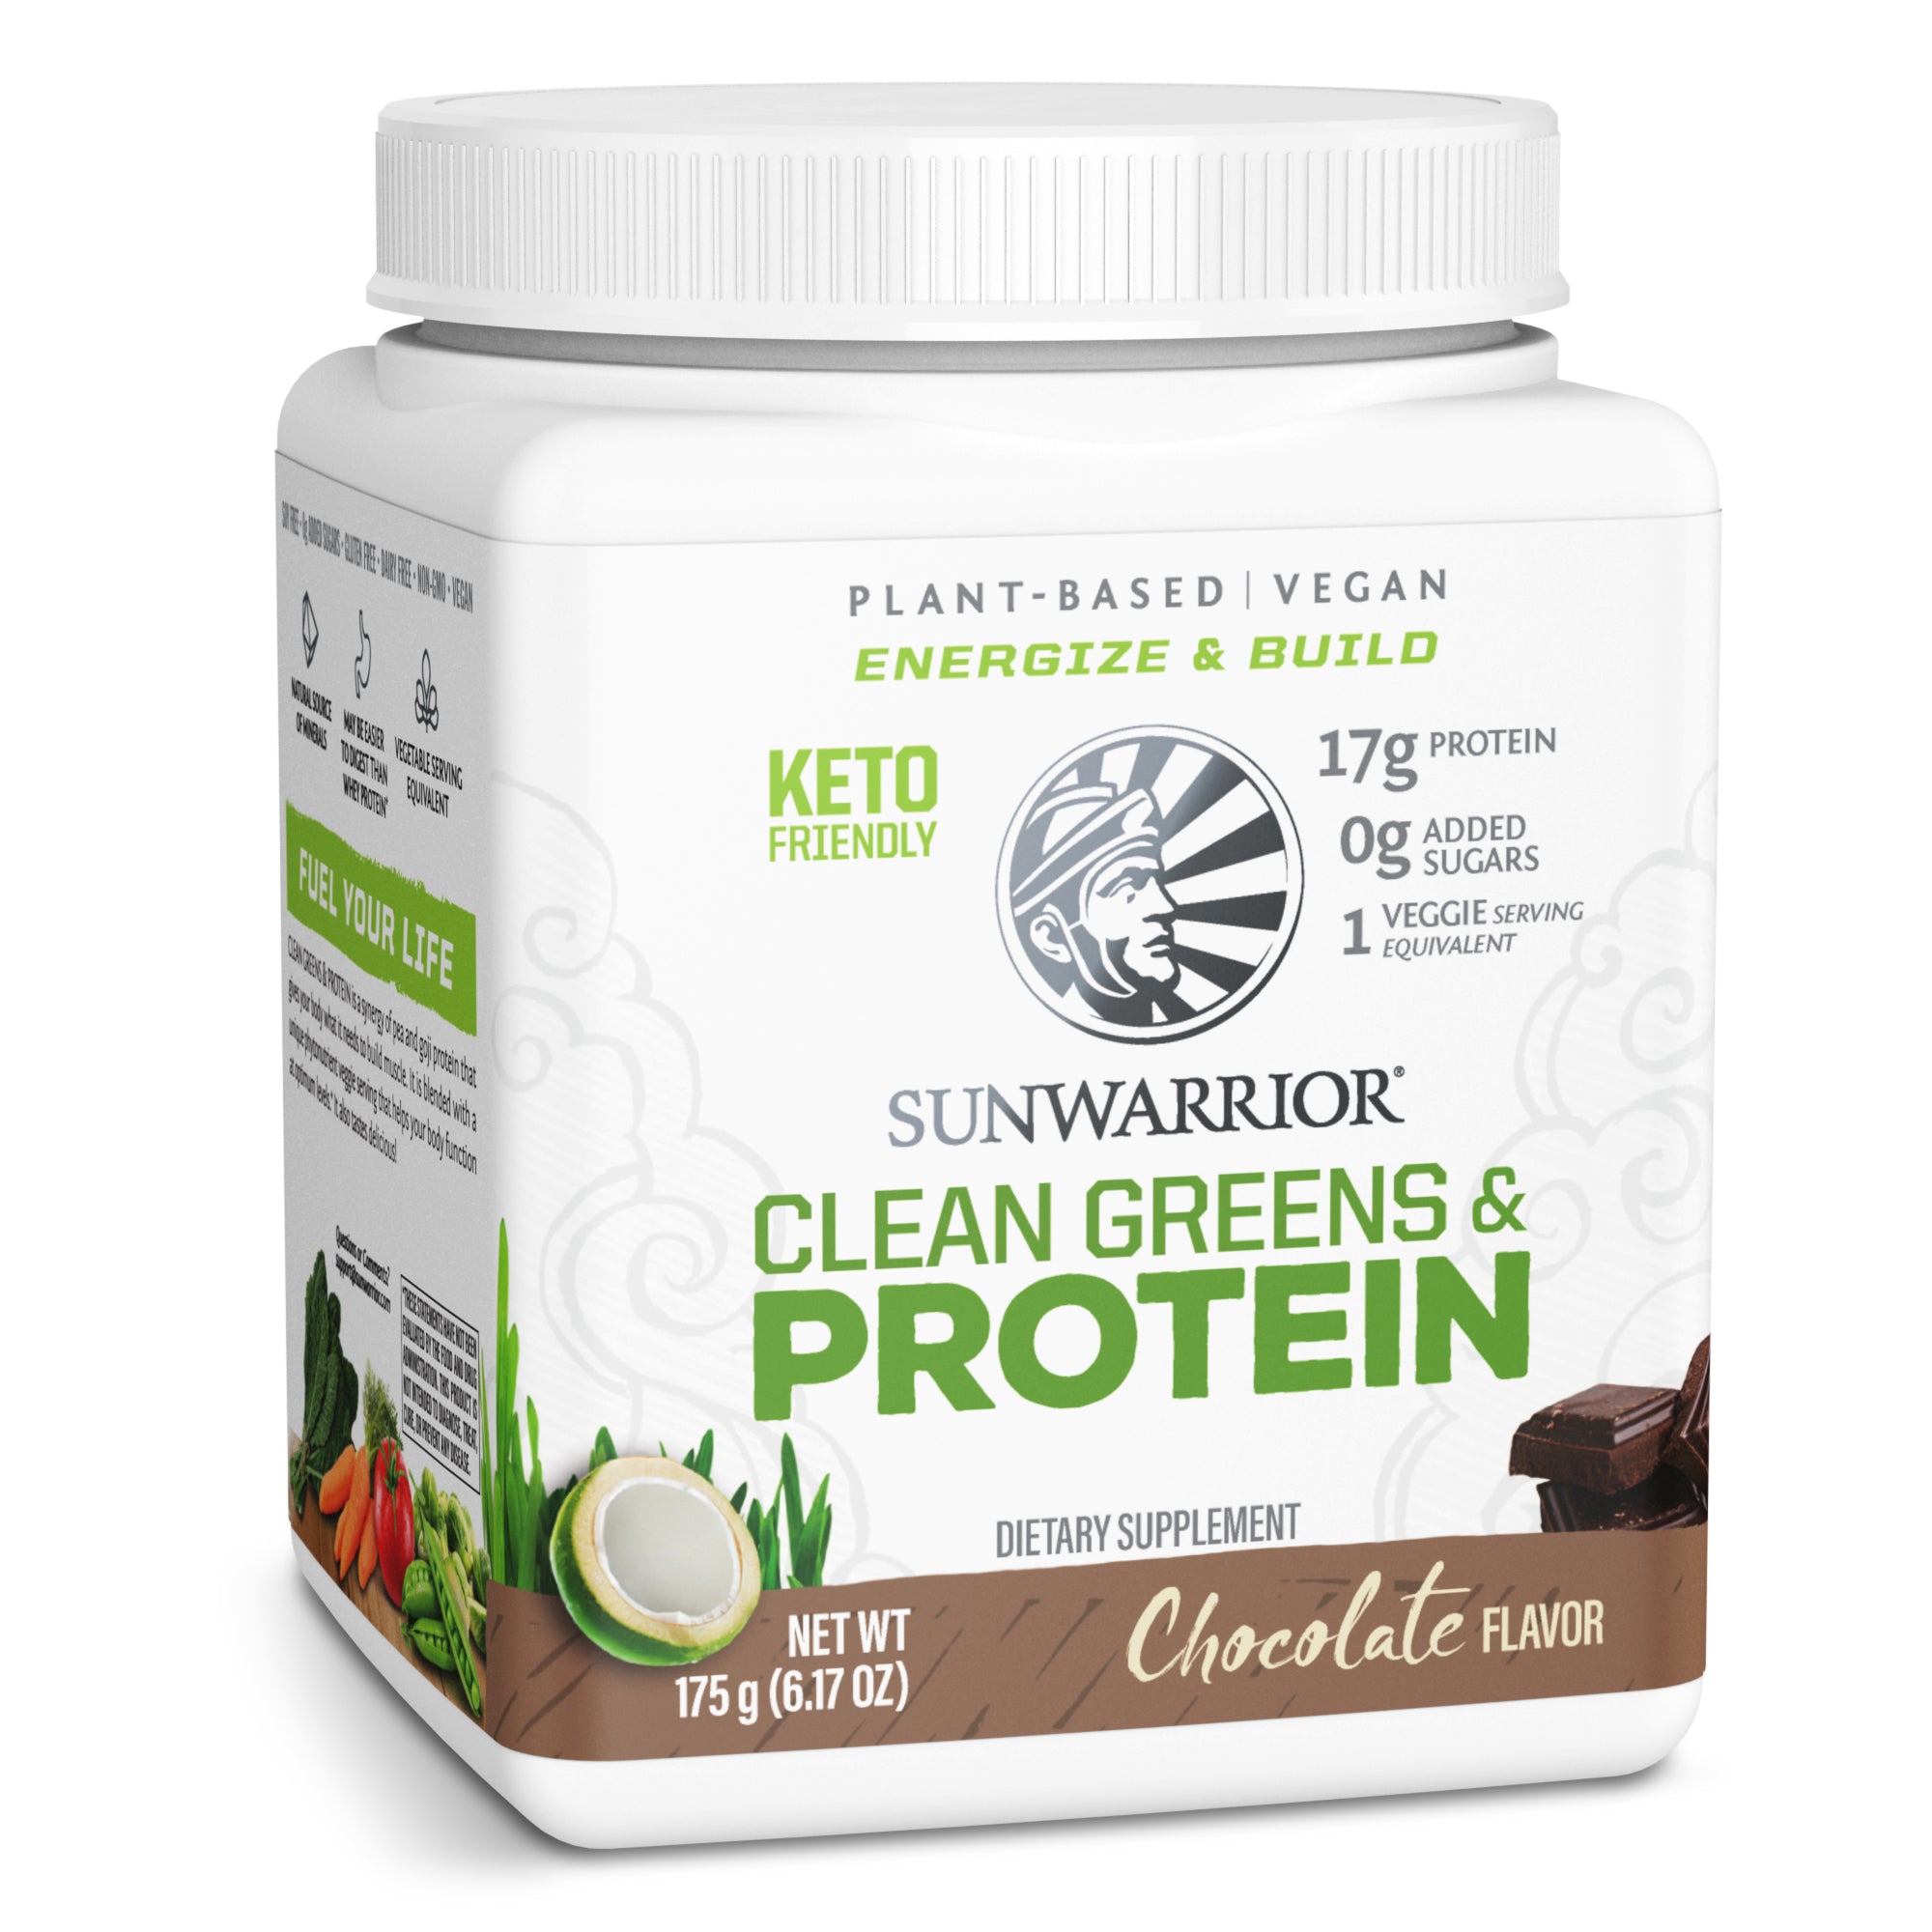 Clean Greens & Protein